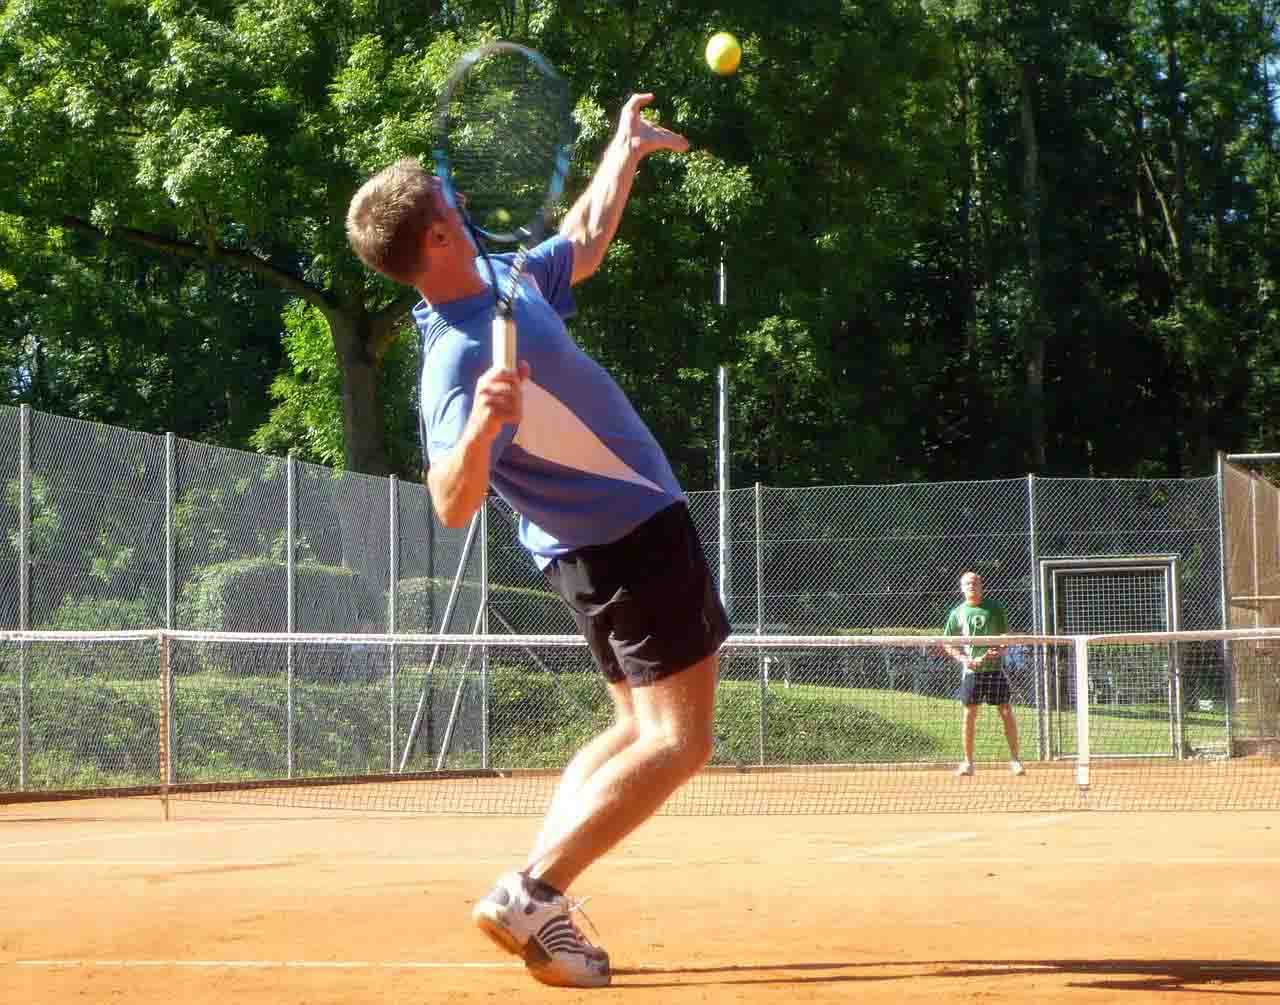 McMurray Chiropractor at Anderson Chiropractic prevents injury & improves tennis game performance through manual adjustments &  rehabilitative exercises 